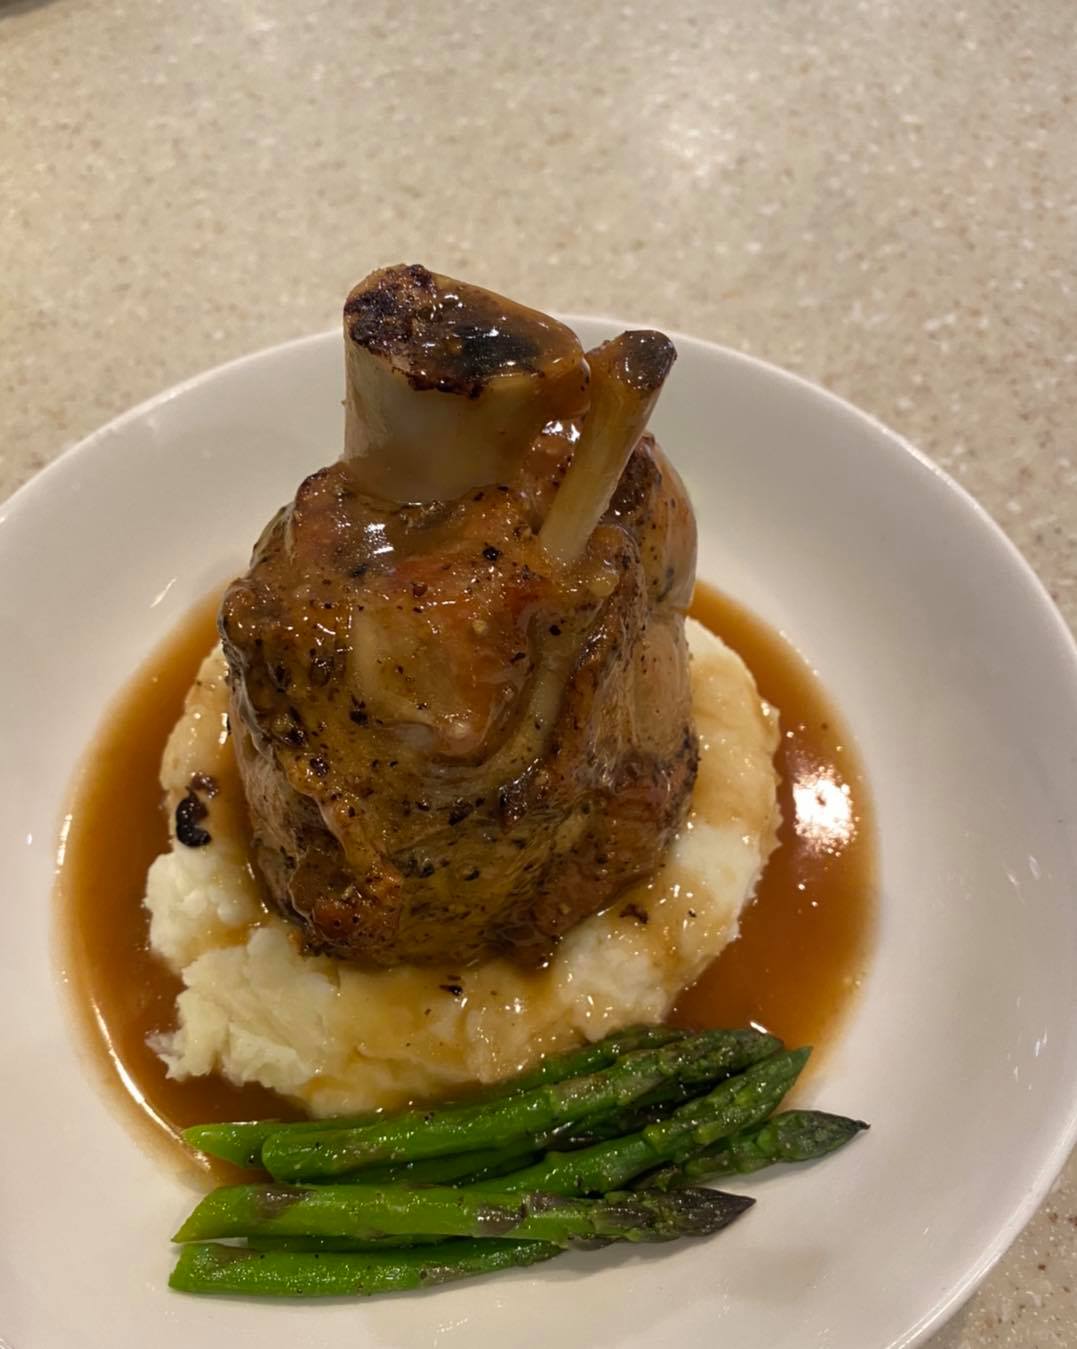 Braised Pork Shank with Mashed Potatoes - Seasonal Specials